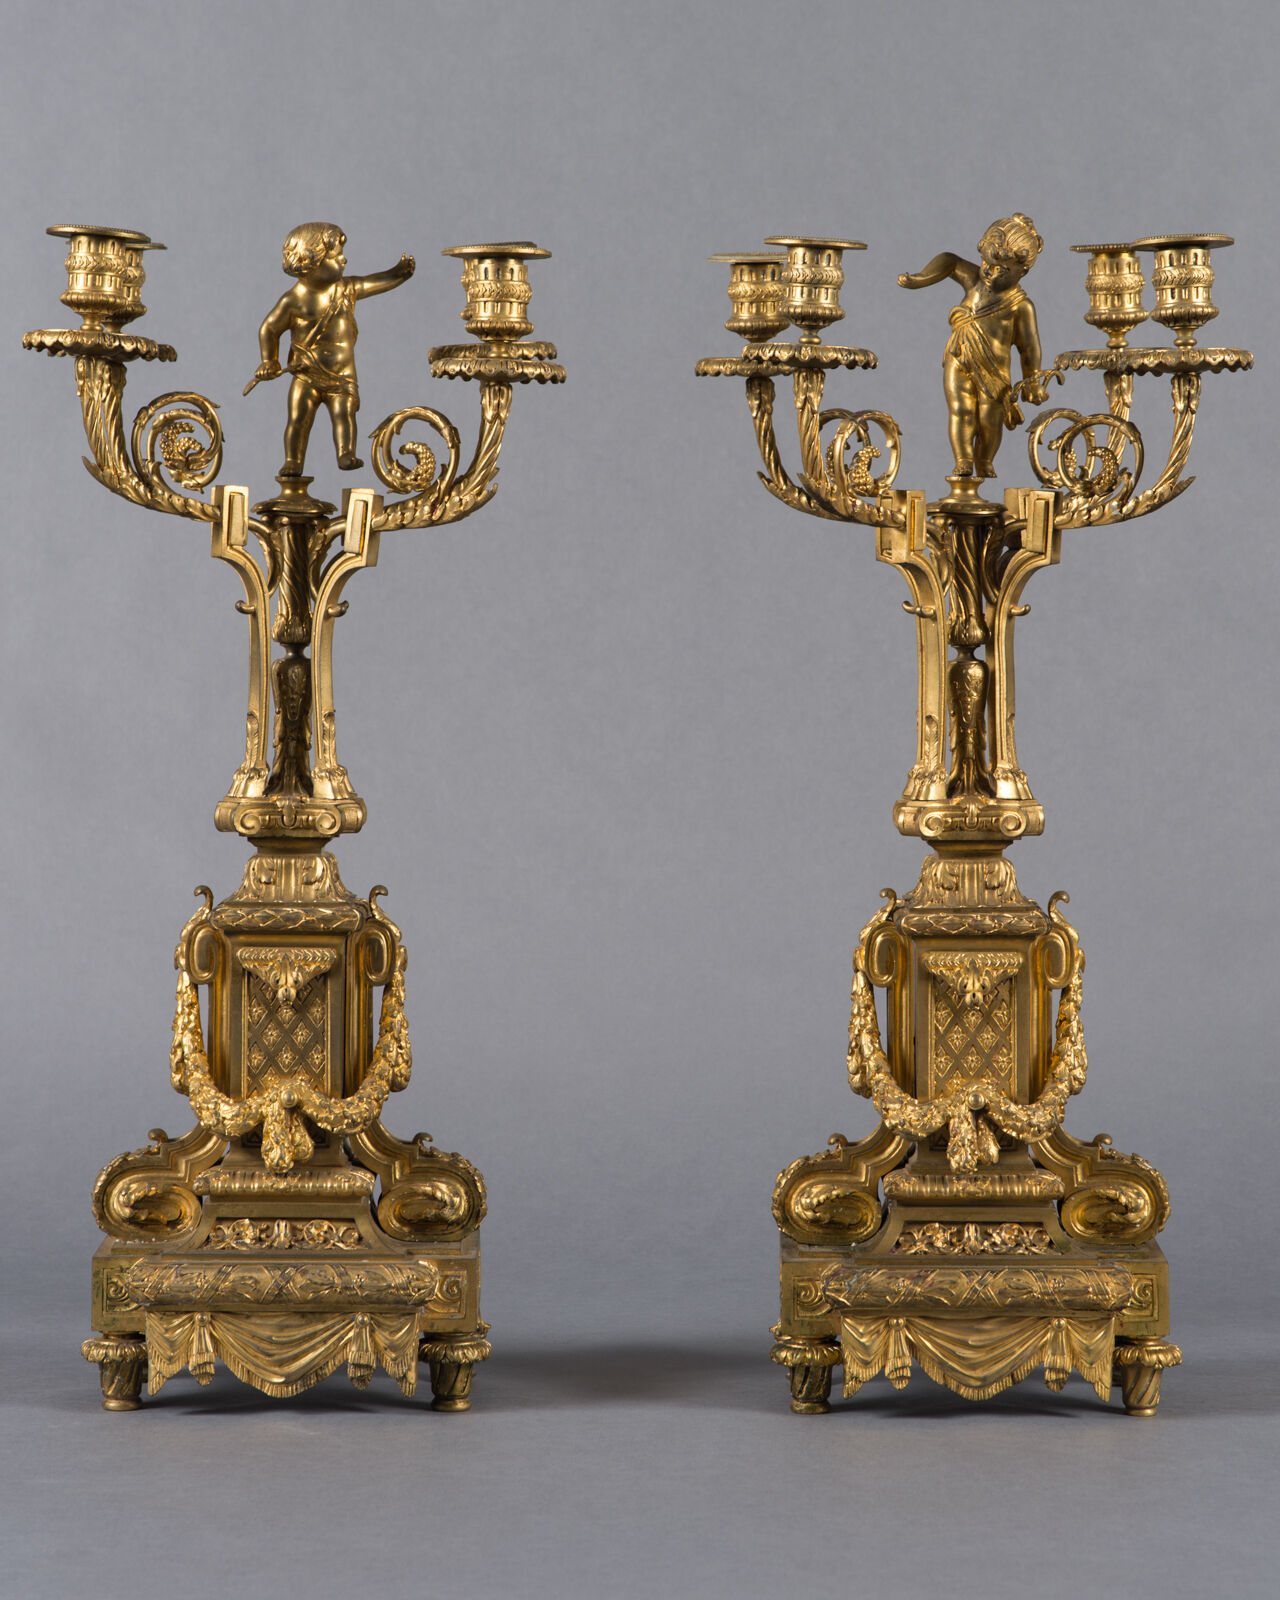 A Pair of Napoleon III French Gilt Bronze Four-branch Figural Candelabras